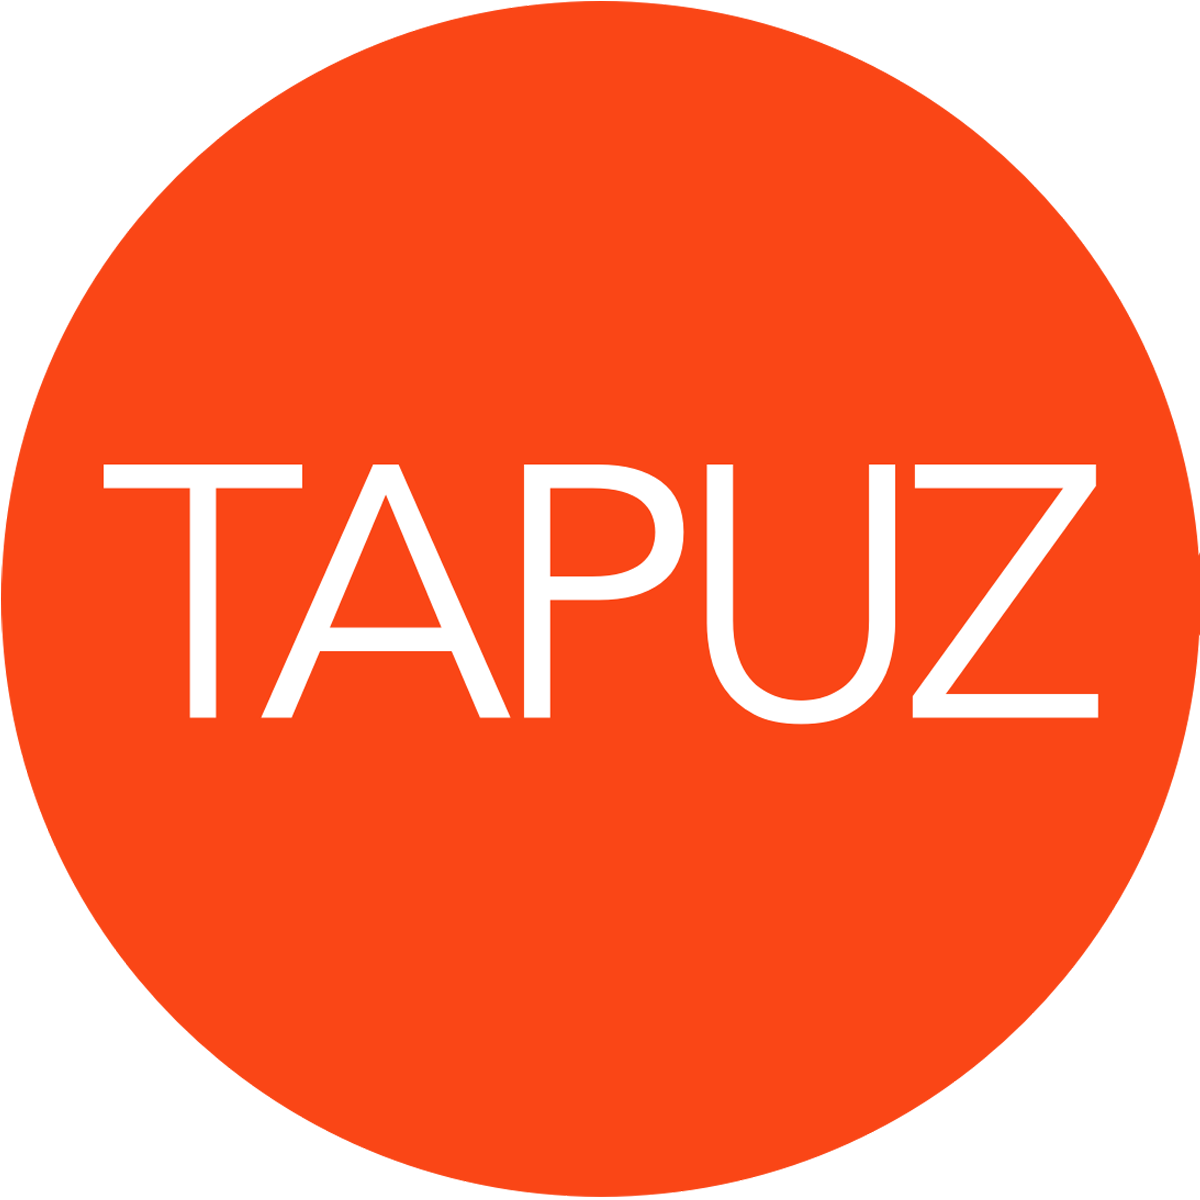 Tapuz Delivery (Official)